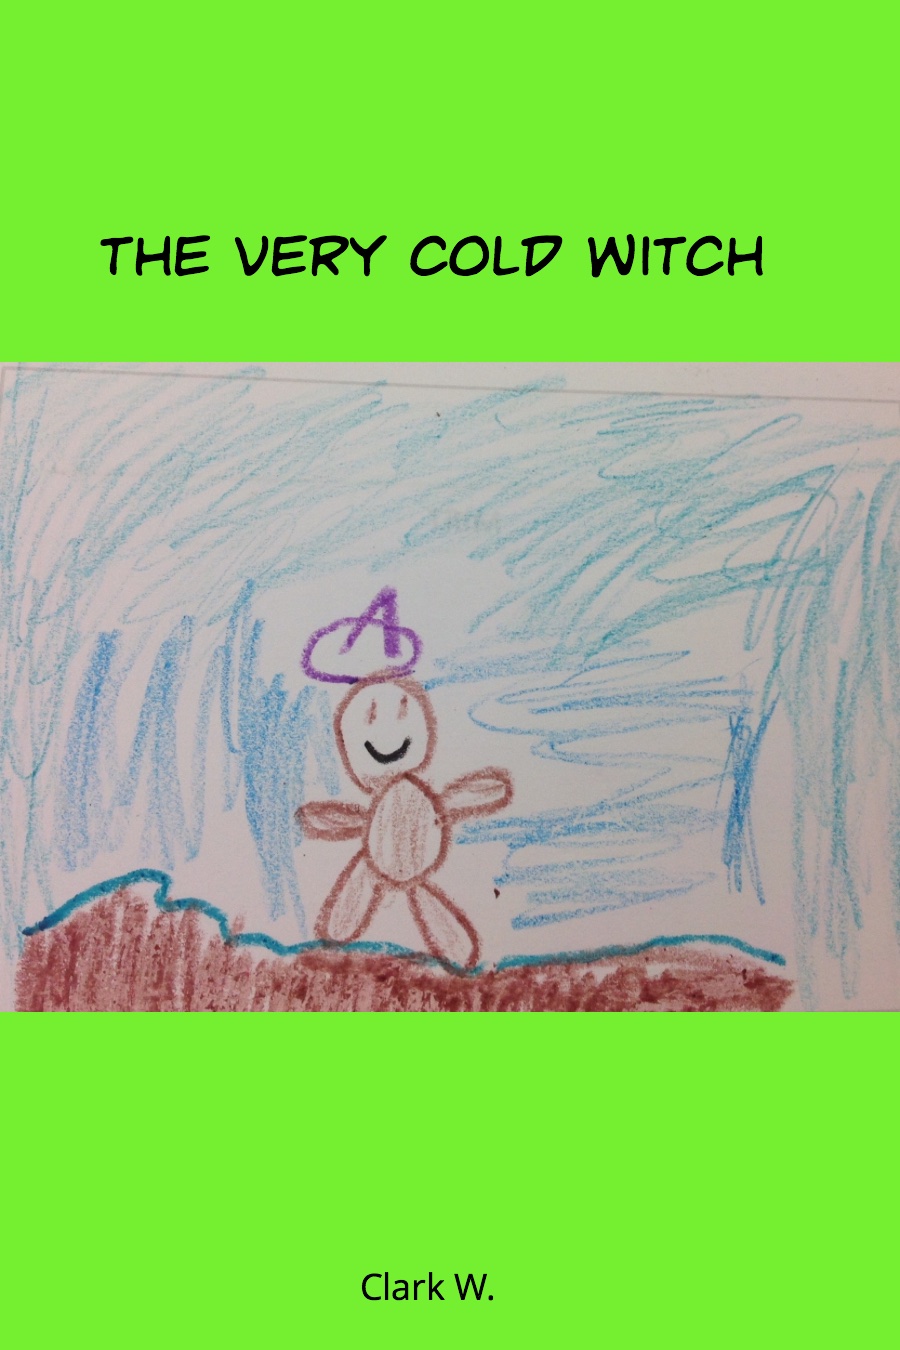 The Very Cold Witch by Clark W